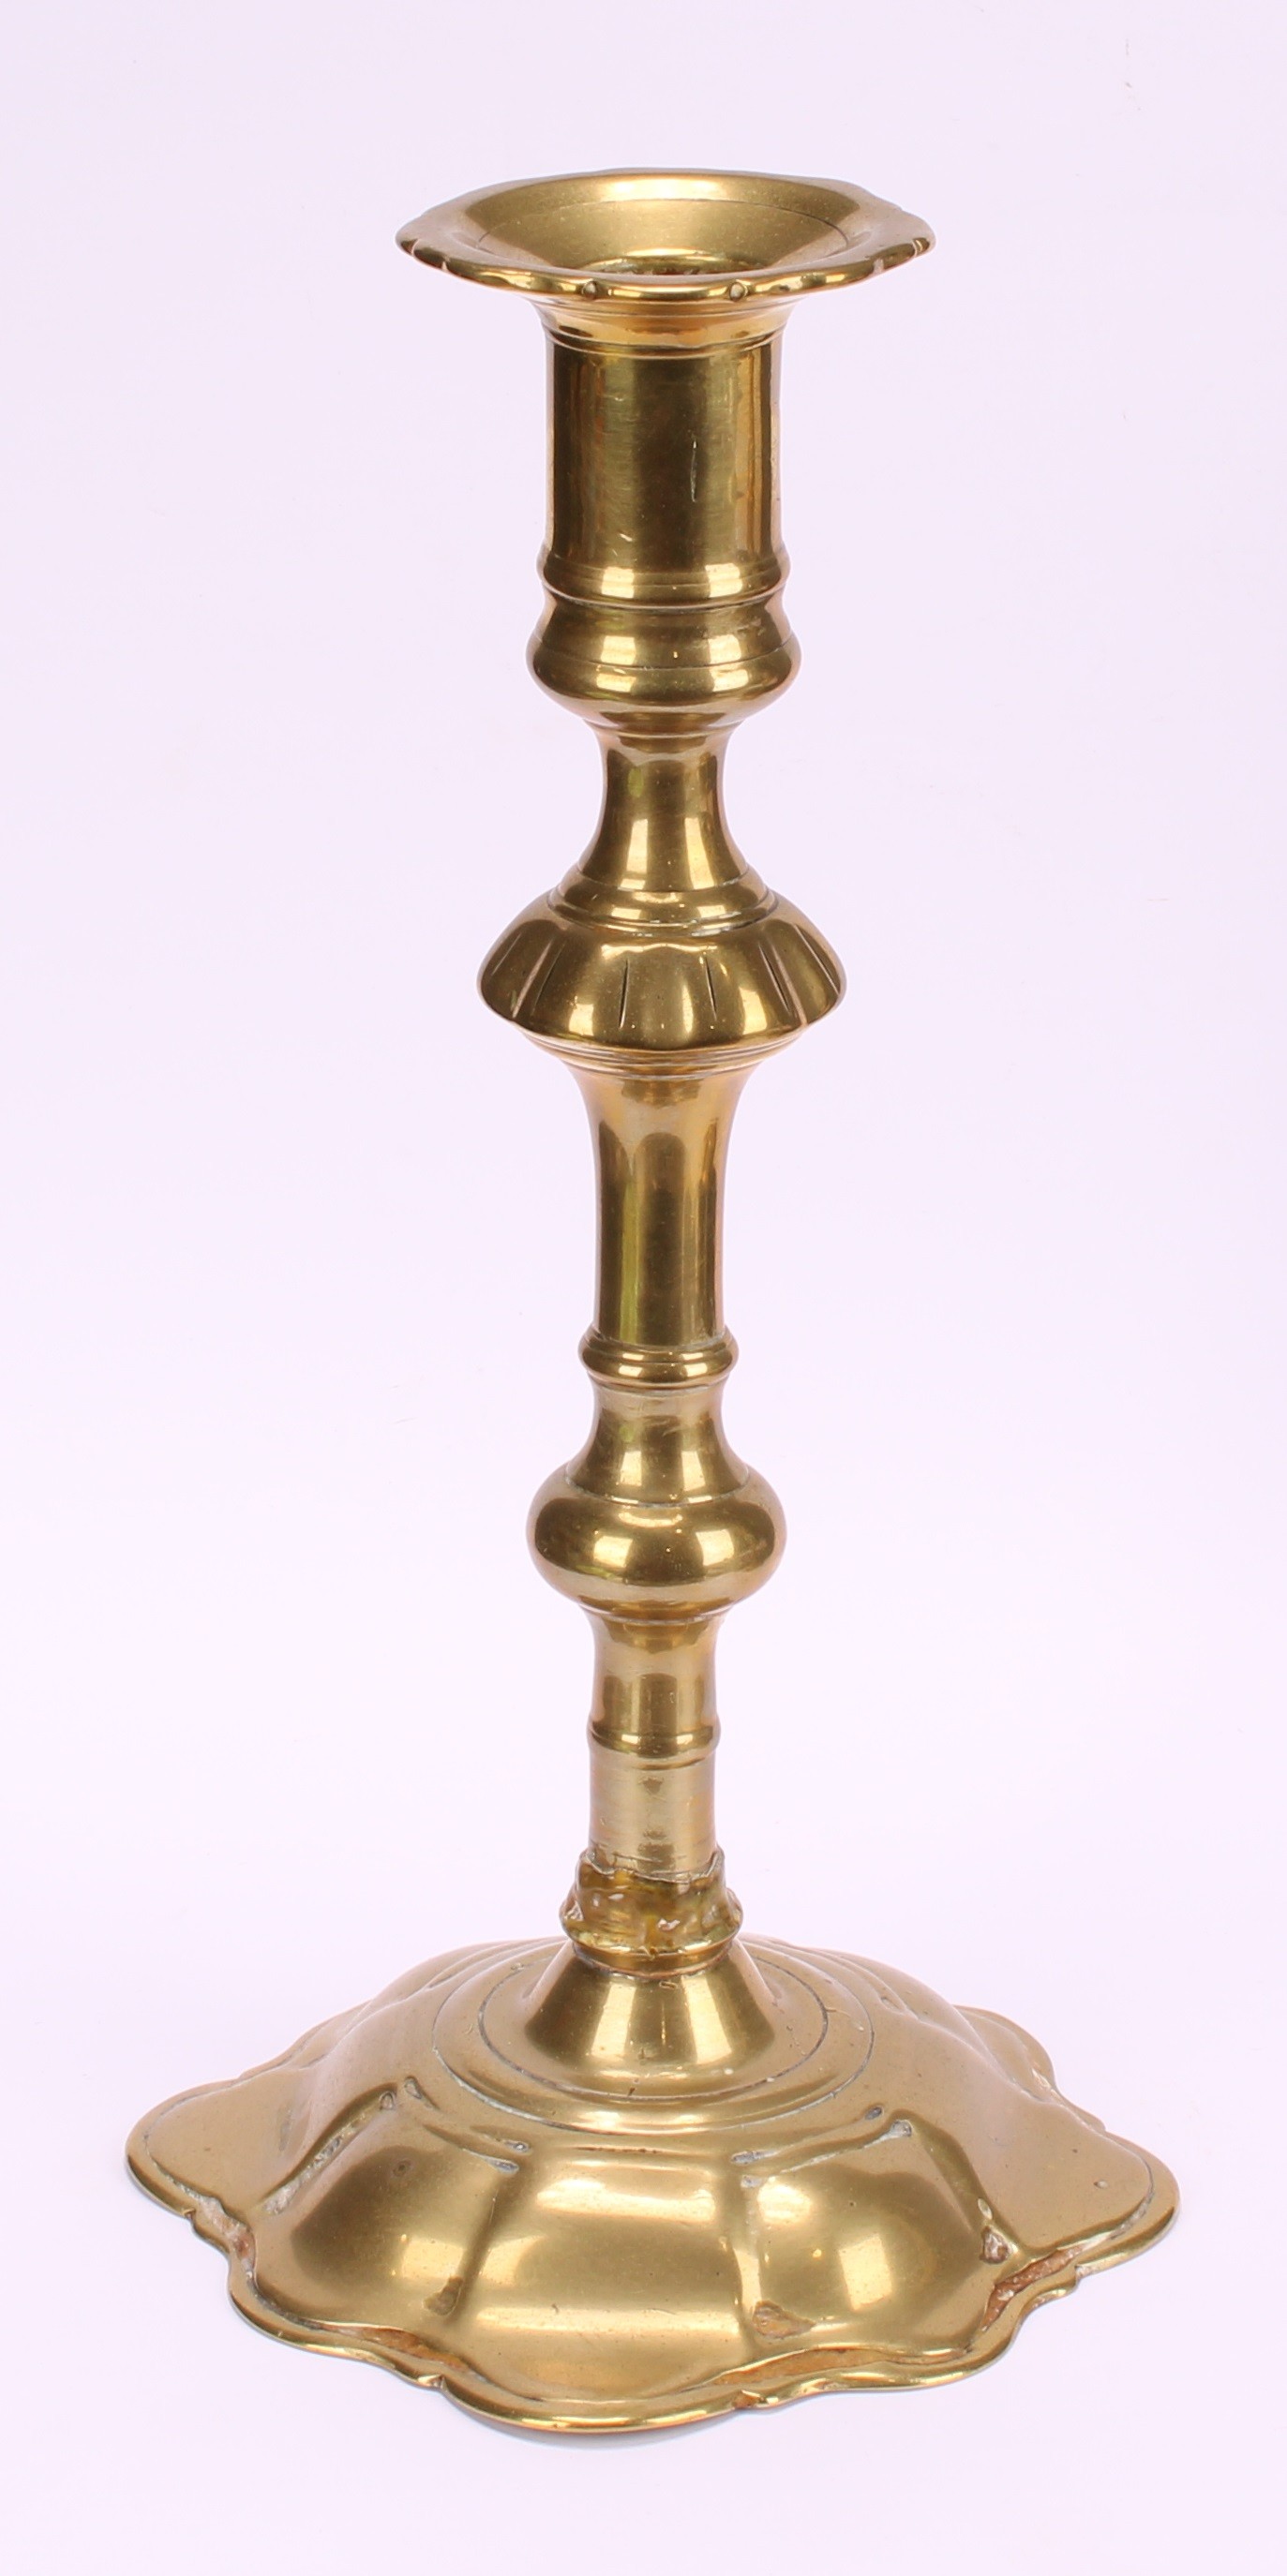 A pair of George II brass candlesticks, knopped pillars, domed shaped bases, 24cm high, c.1745 - Image 3 of 4